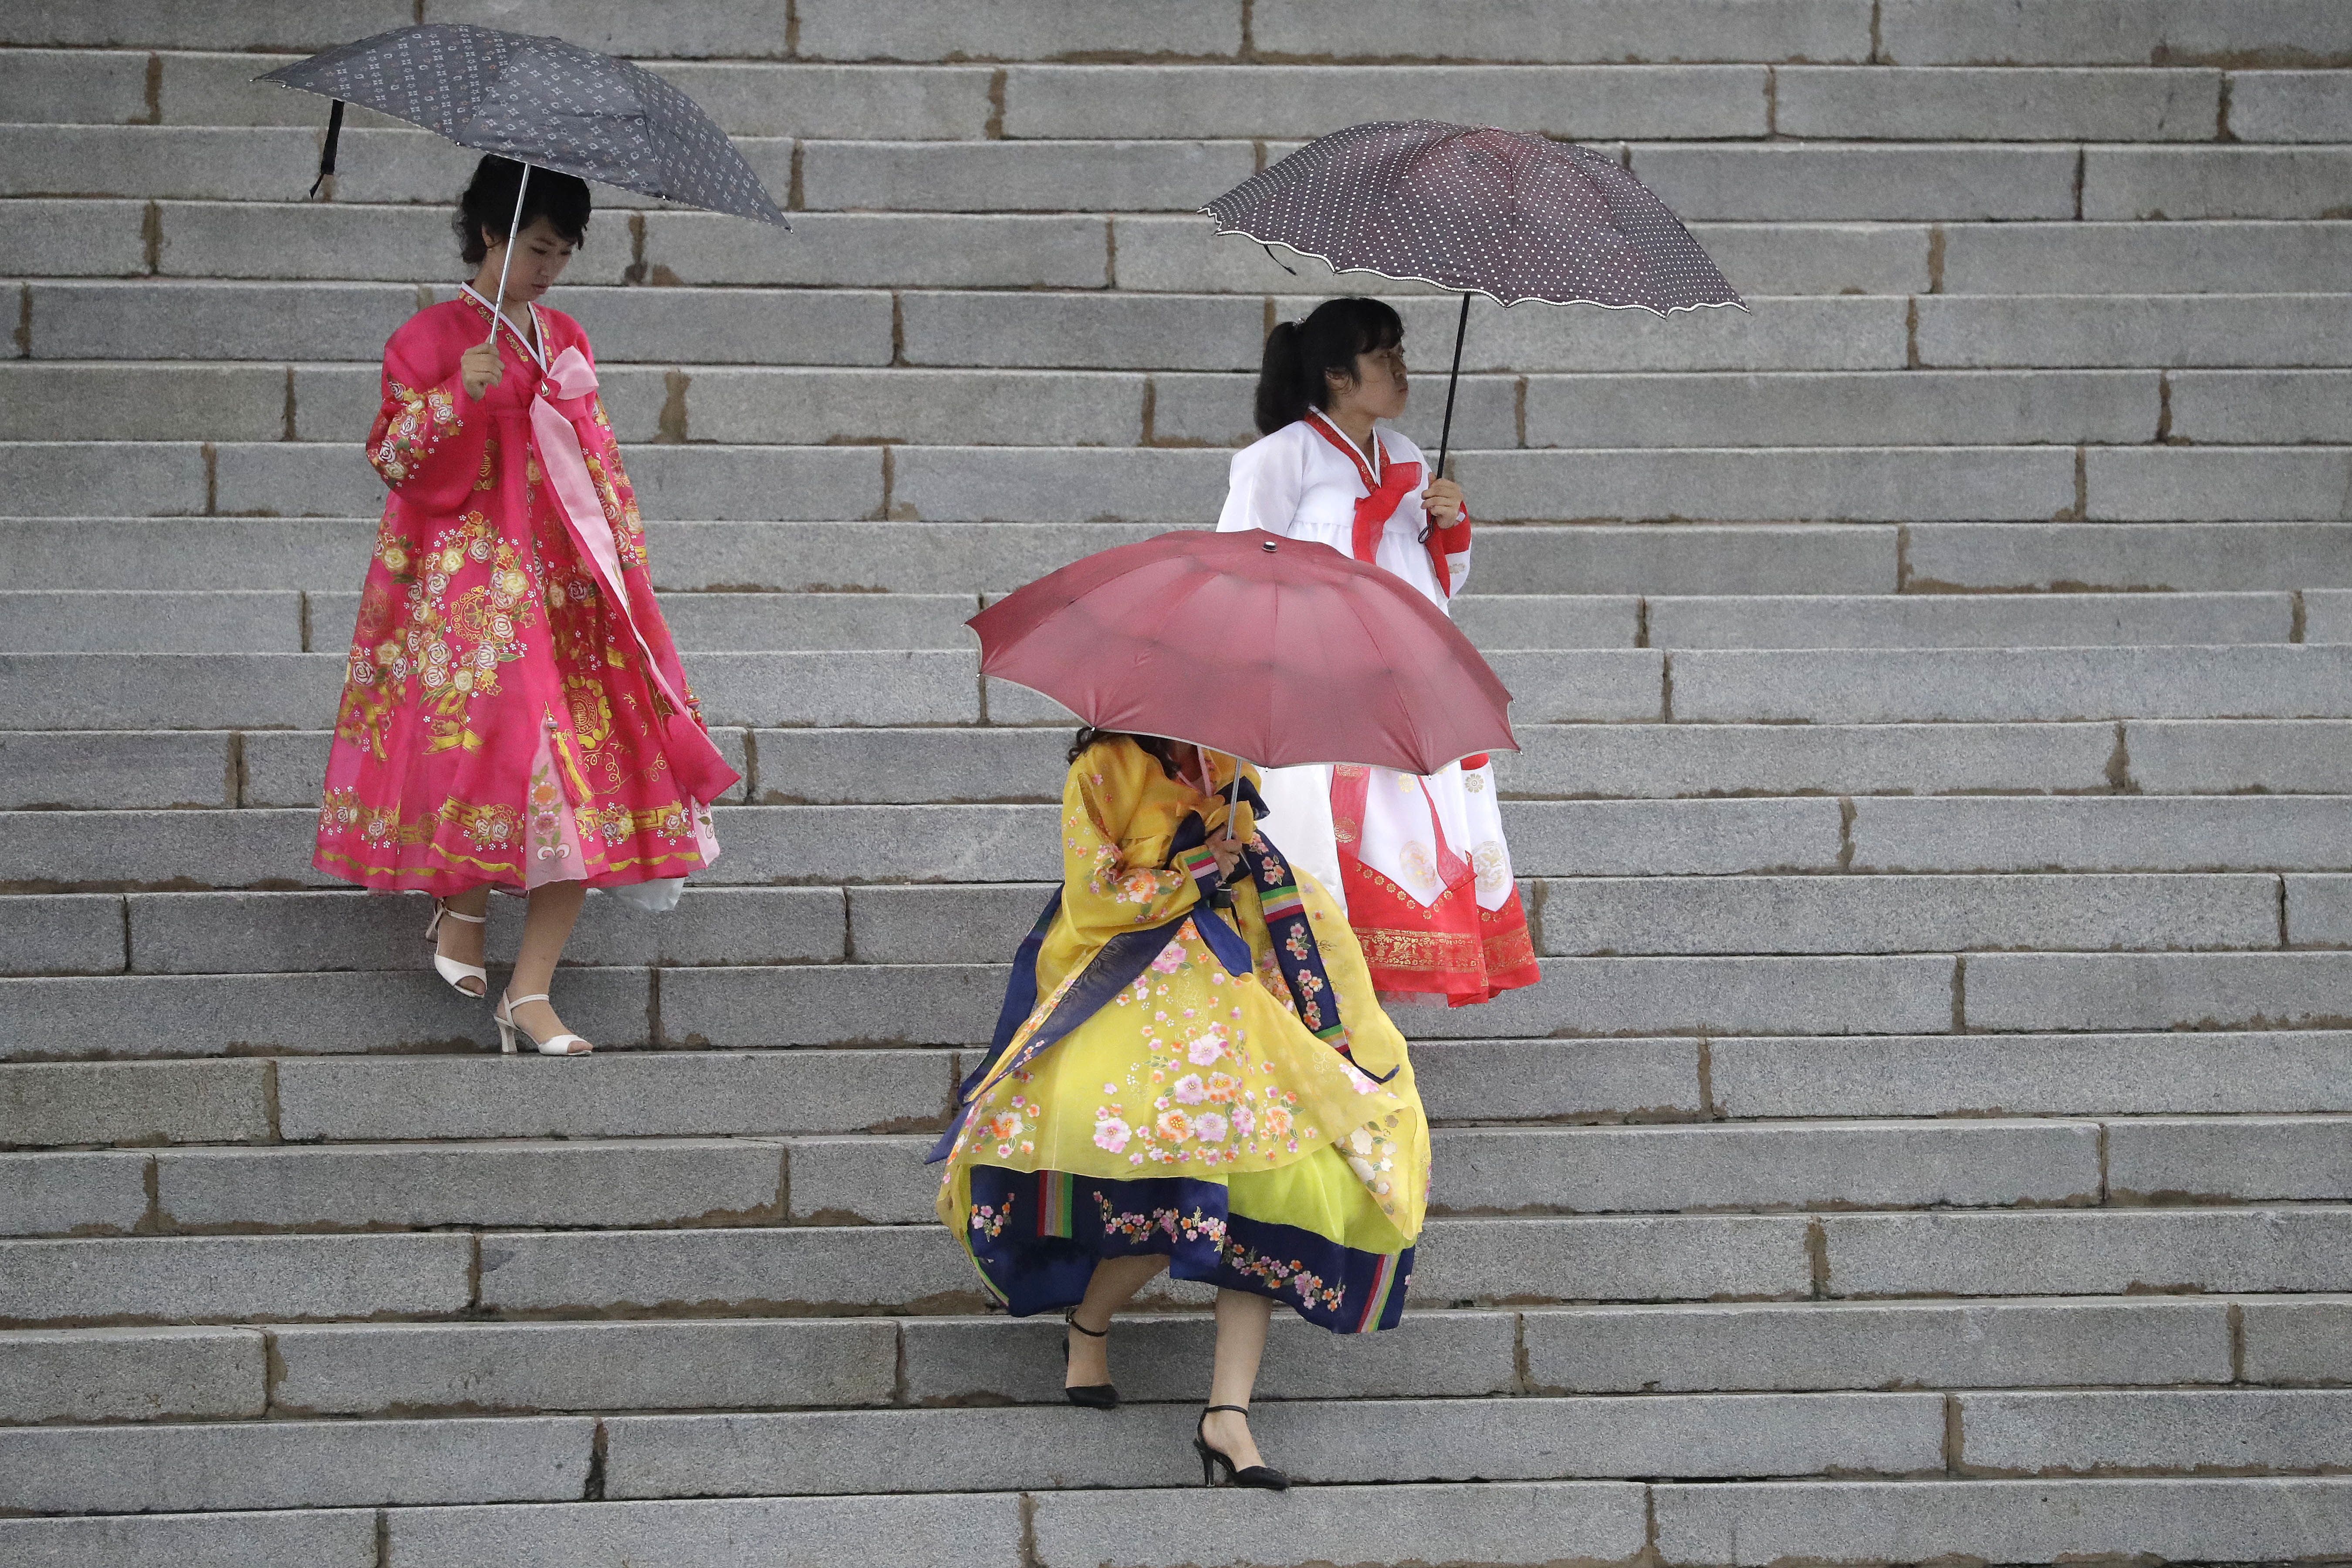 North Korean university students wearing their traditional Korean dresses make their way for a mass dance event in the rain on Thursday, July 27, 2017, in Pyongyang, North Korea as part of celebrations for the 64th anniversary of the armistice that ended the Korean War. (AP Photo/Wong Maye-E)